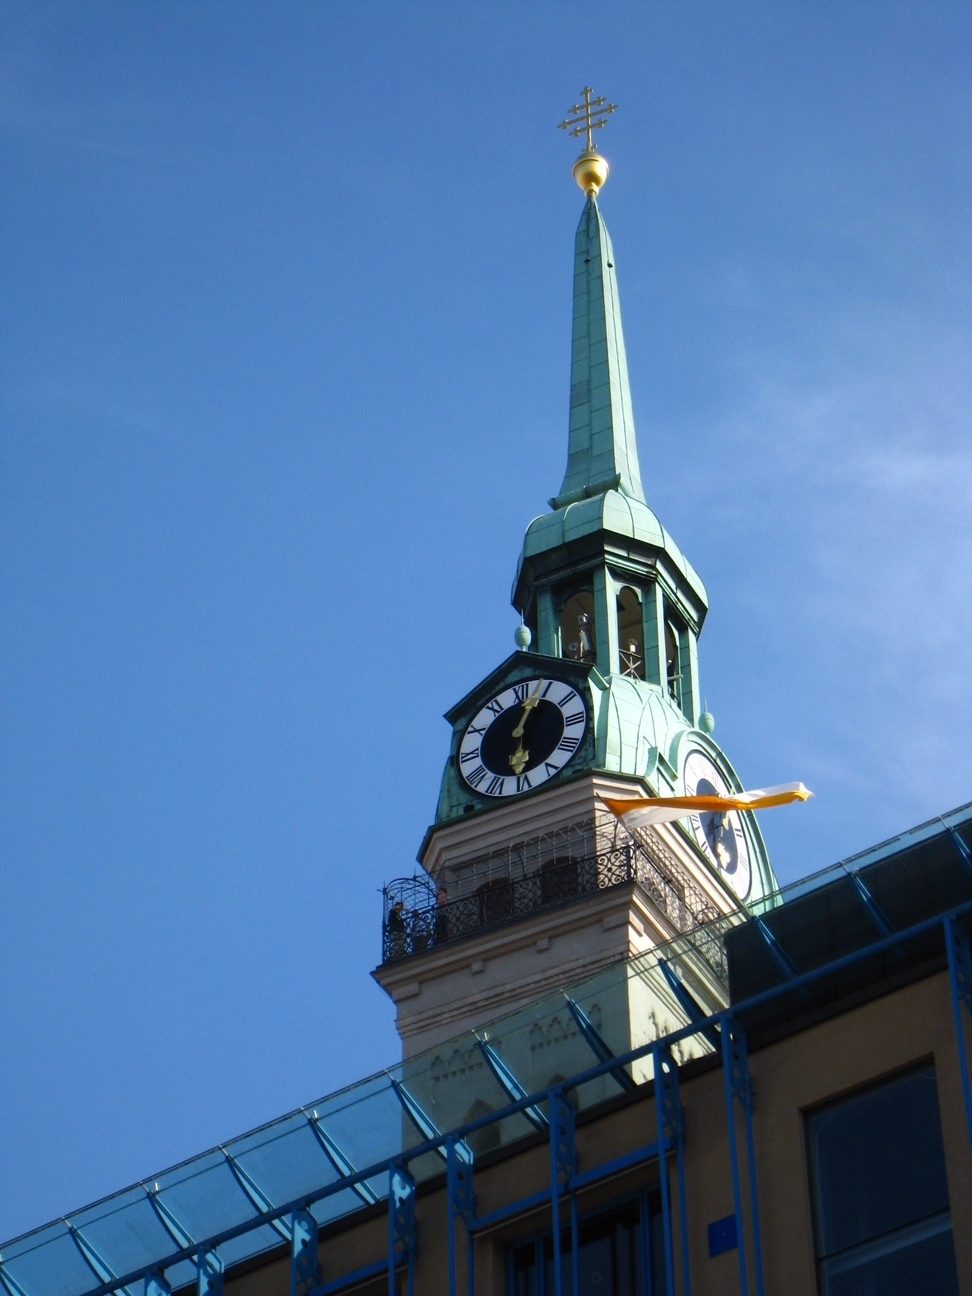 The tower of St. Peterskirche (Photo courtesy of Pauline Trummel)